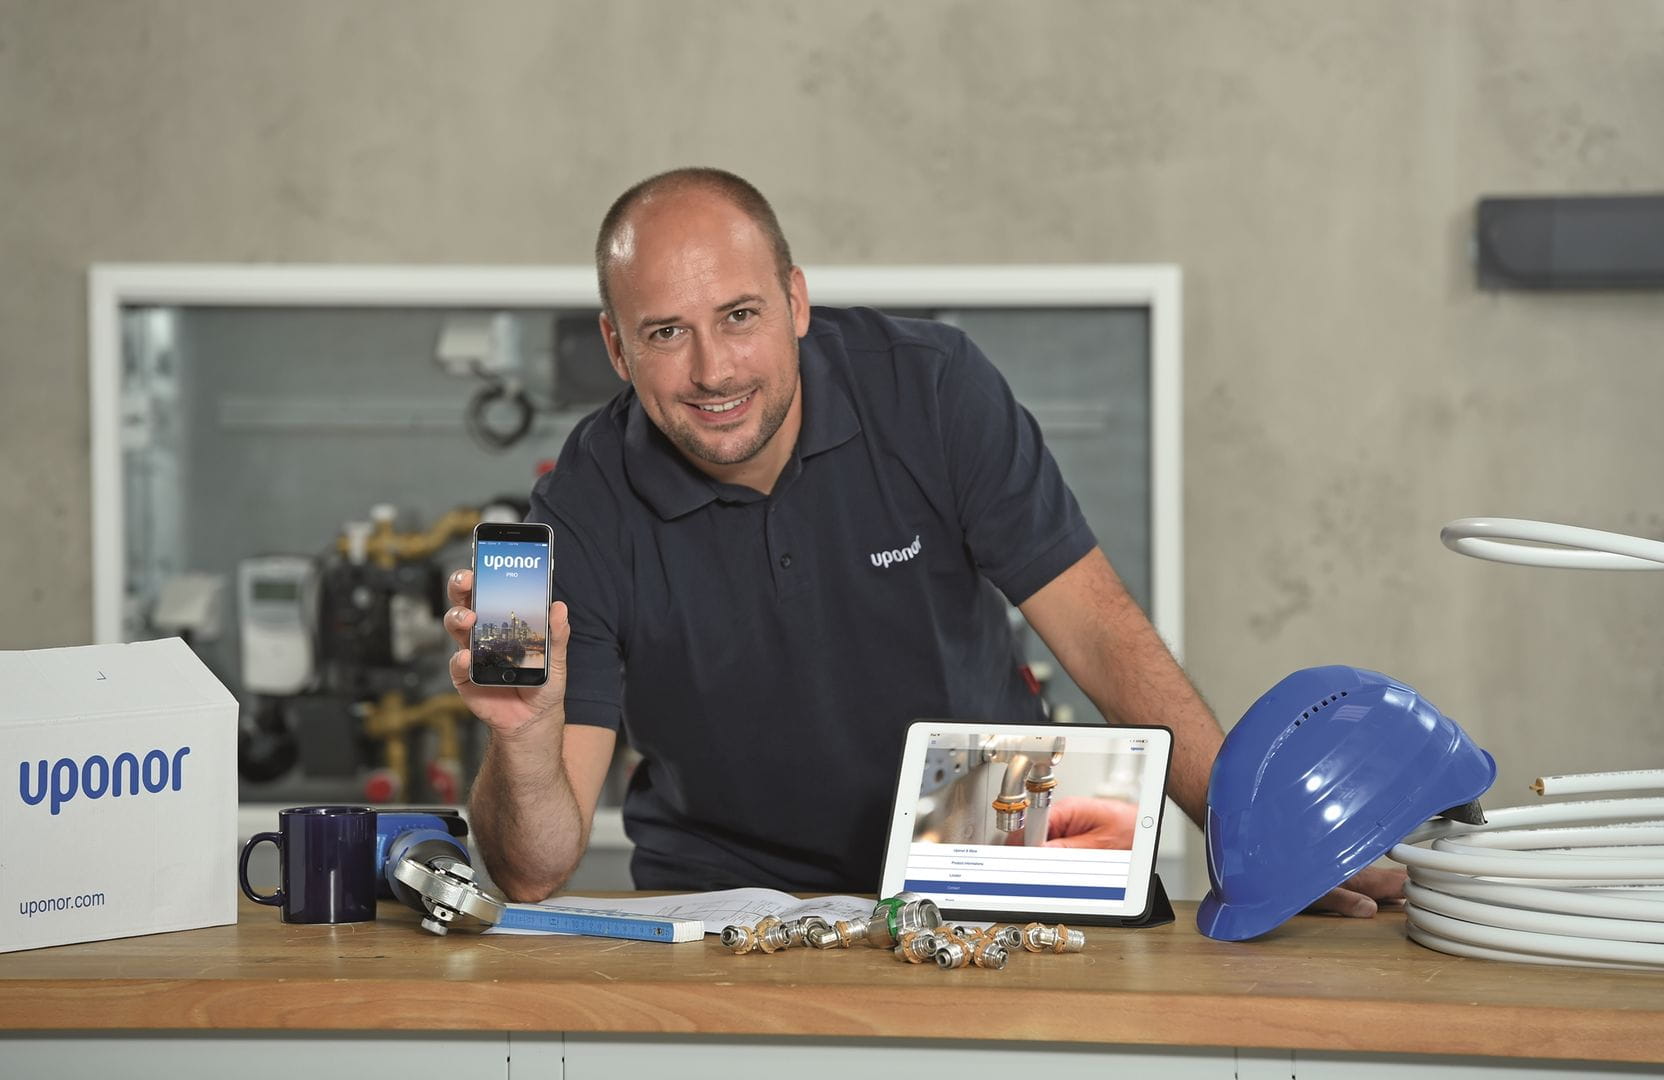 Uponor PRO app